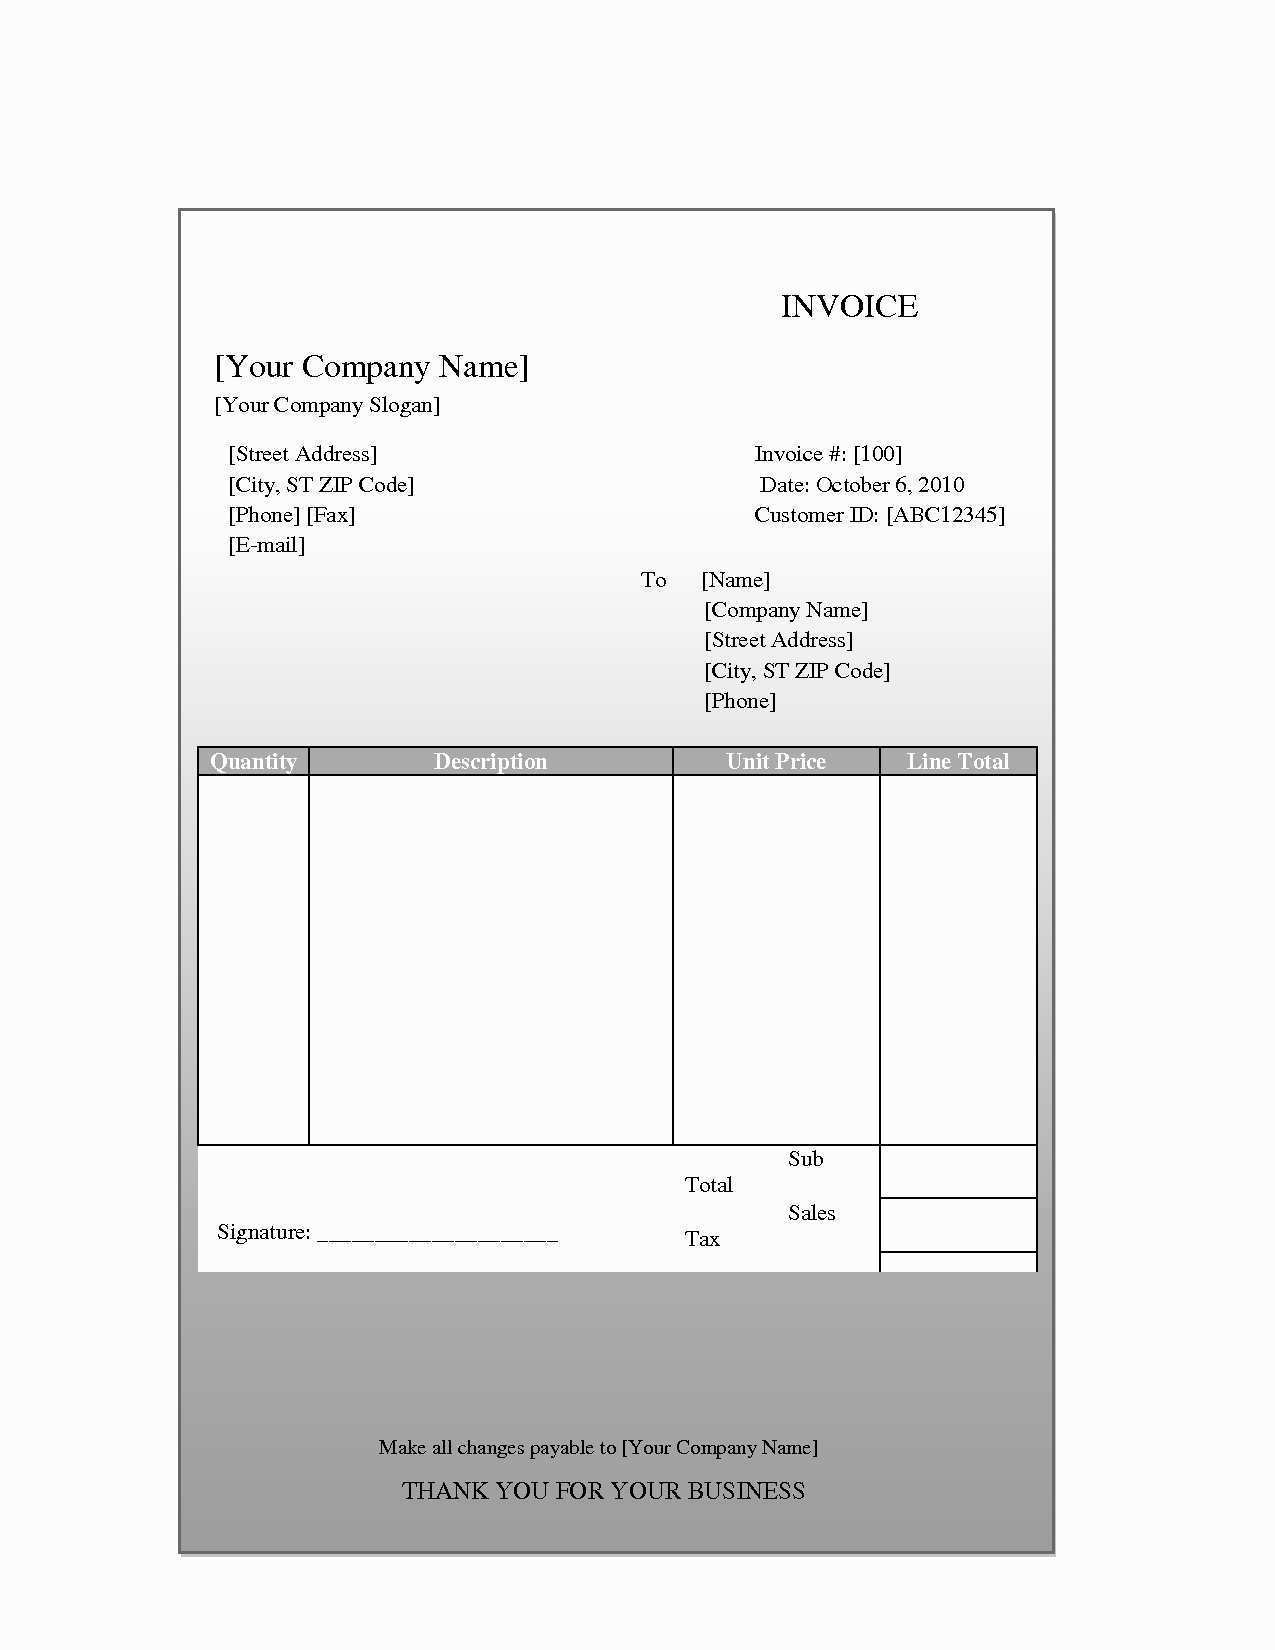 73 Blank Blank Job Invoice Template Templates by Blank Job Invoice Template